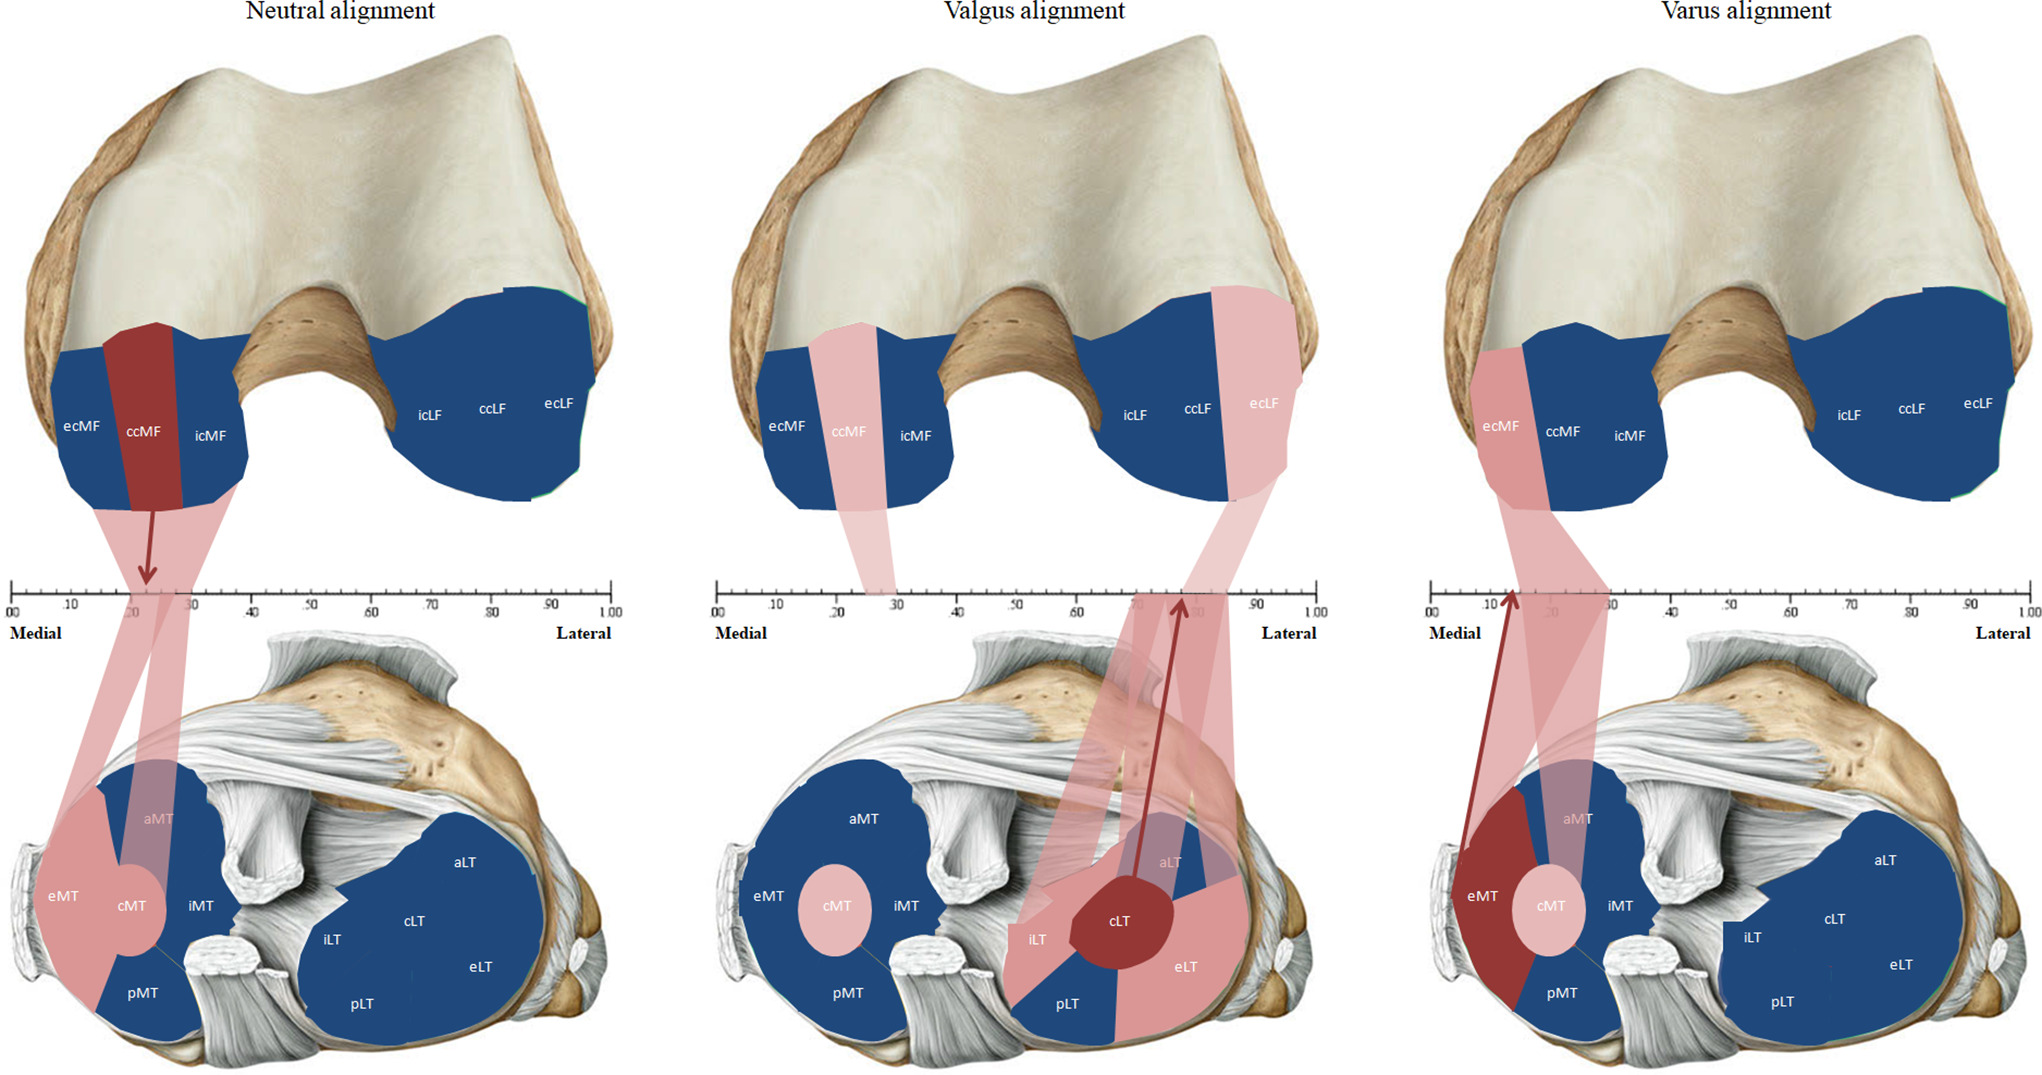 Fig. 6 
          Data derived from Table II show the analyzed subregions at the tibia (lower section) and the femur (upper section) with highlights of specific areas of high correlation between cartilage thickness loss and its corresponding (x)-specific location. Colour-coded correlations: Blue area, subregion with low statistical correlation (r < 0.7); pink area, subregion with high statistical correlation (r ≥ 0.7); red area, subregion with highest statistical correlation in its alignment group; arrow, (x)-location with highest statistical correlation in its alignment group. aLT, anterior lateral tibia; aMT, anterior medial tibia; ccLF, central lateral femur; ccMF, central medial femur; cLT, central lateral tibia; cMT, central medial tibia; ecLF, external central lateral femur; ecMF, external central medial femur; eLT, external lateral tibia; eMT, external medial tibia; icLF, internal central lateral femur; icMF, internal central medial femur; iLT, internal lateral tibia; iMT, internal medial tibia; pLT, posterior lateral tibia; pMT, posterior medial tibia.
        